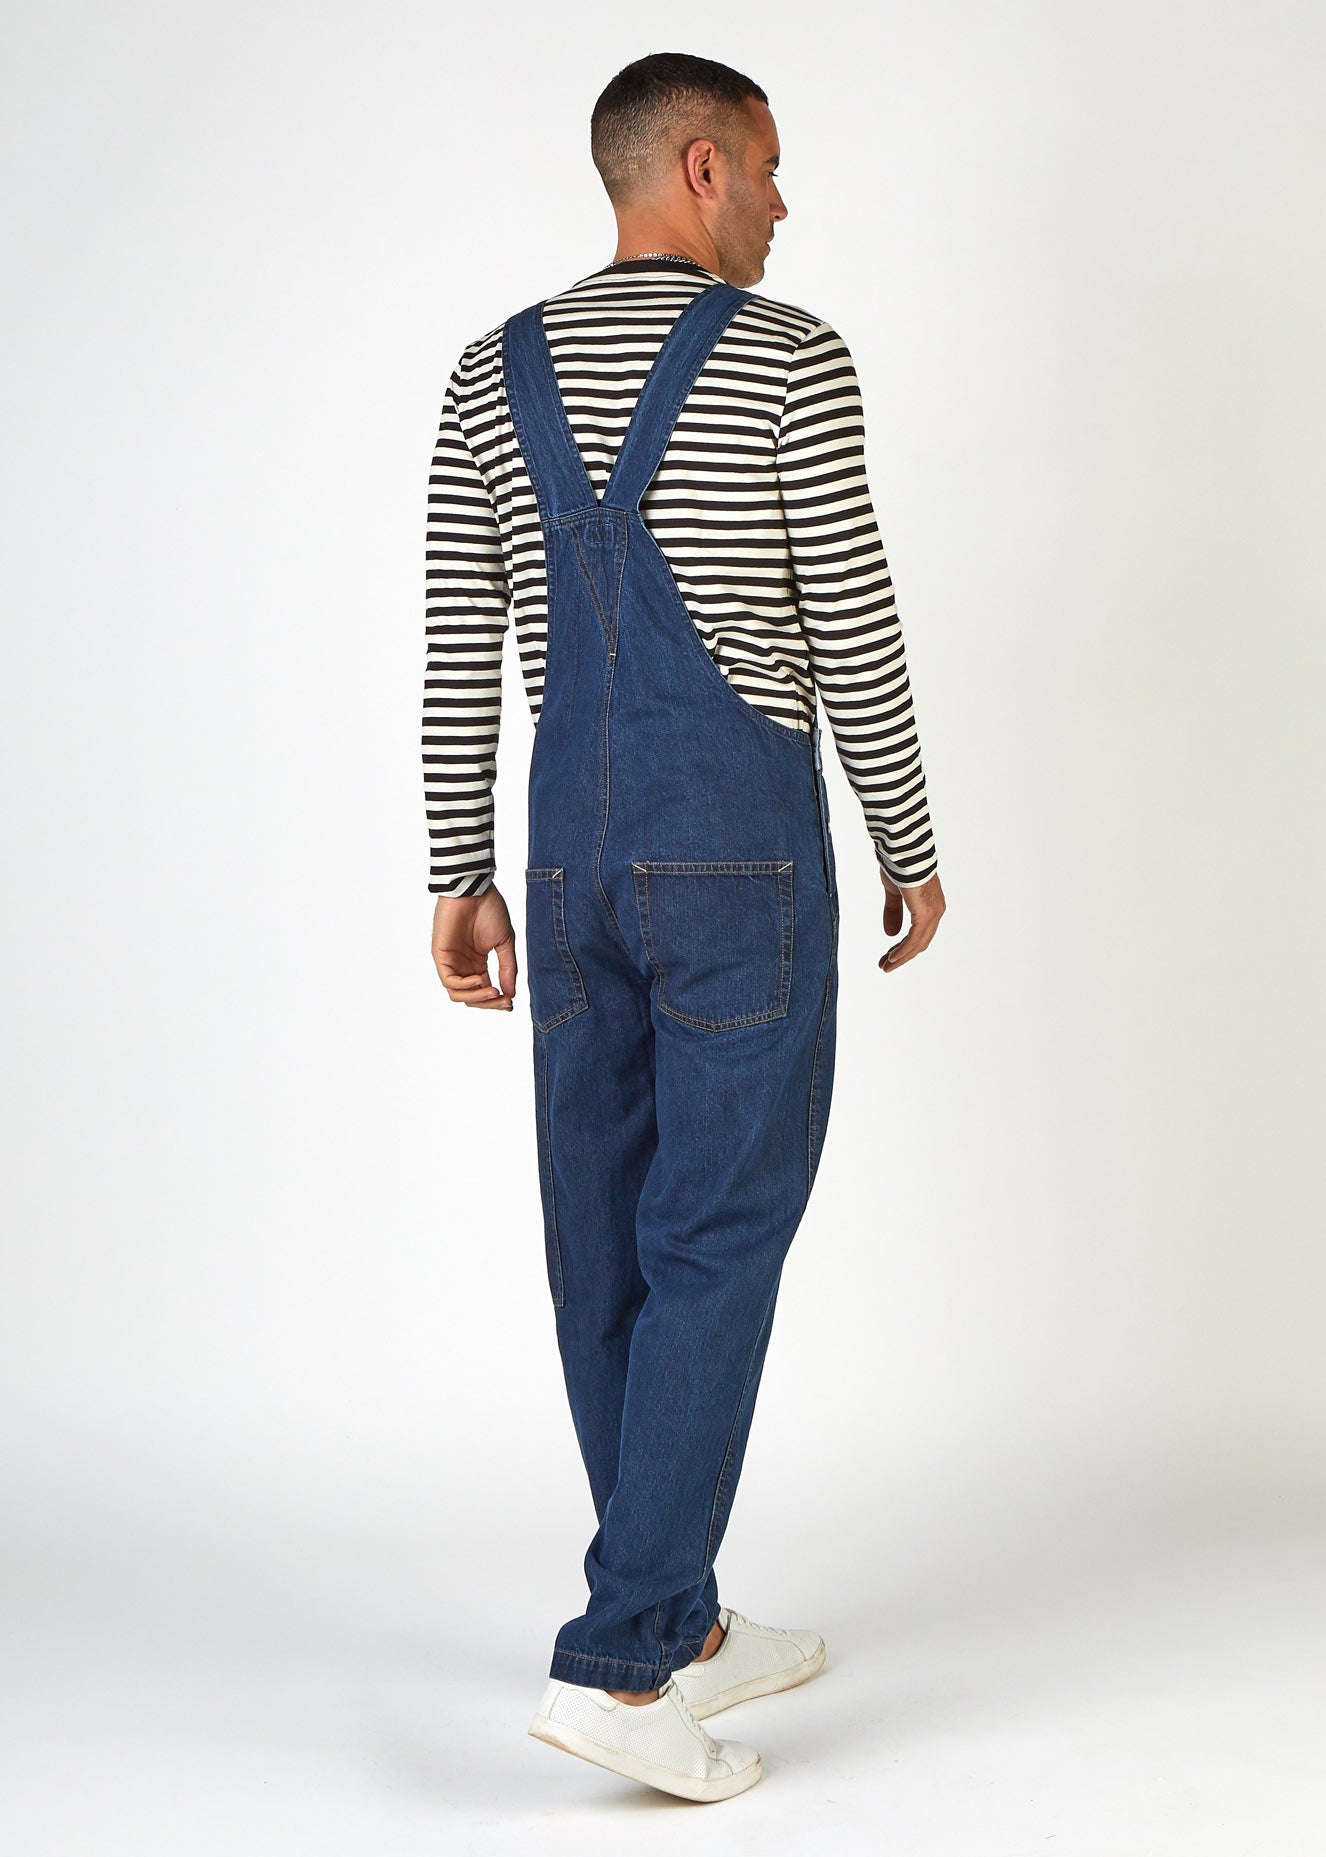 Back view twisting angled lightly to right, wearing indigo bib-overalls with clear view of back pockets and back strap.